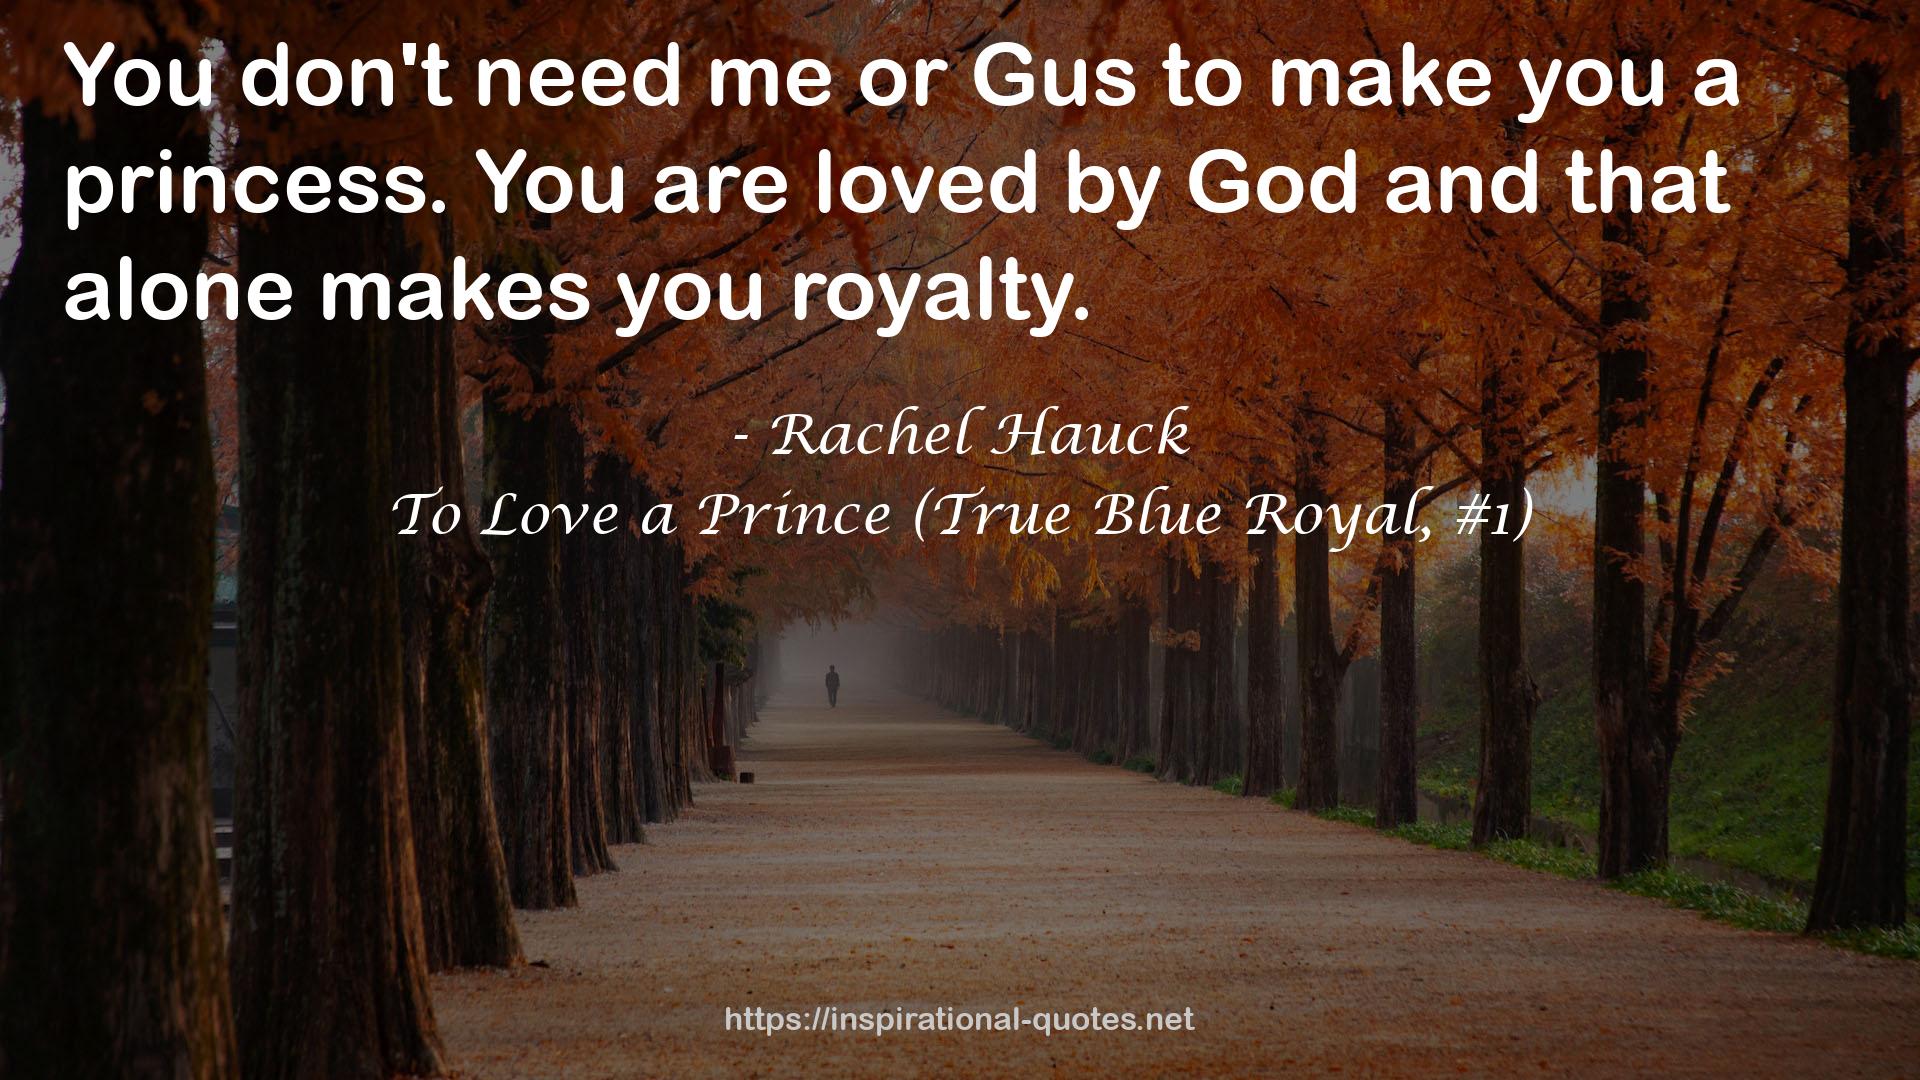 To Love a Prince (True Blue Royal, #1) QUOTES